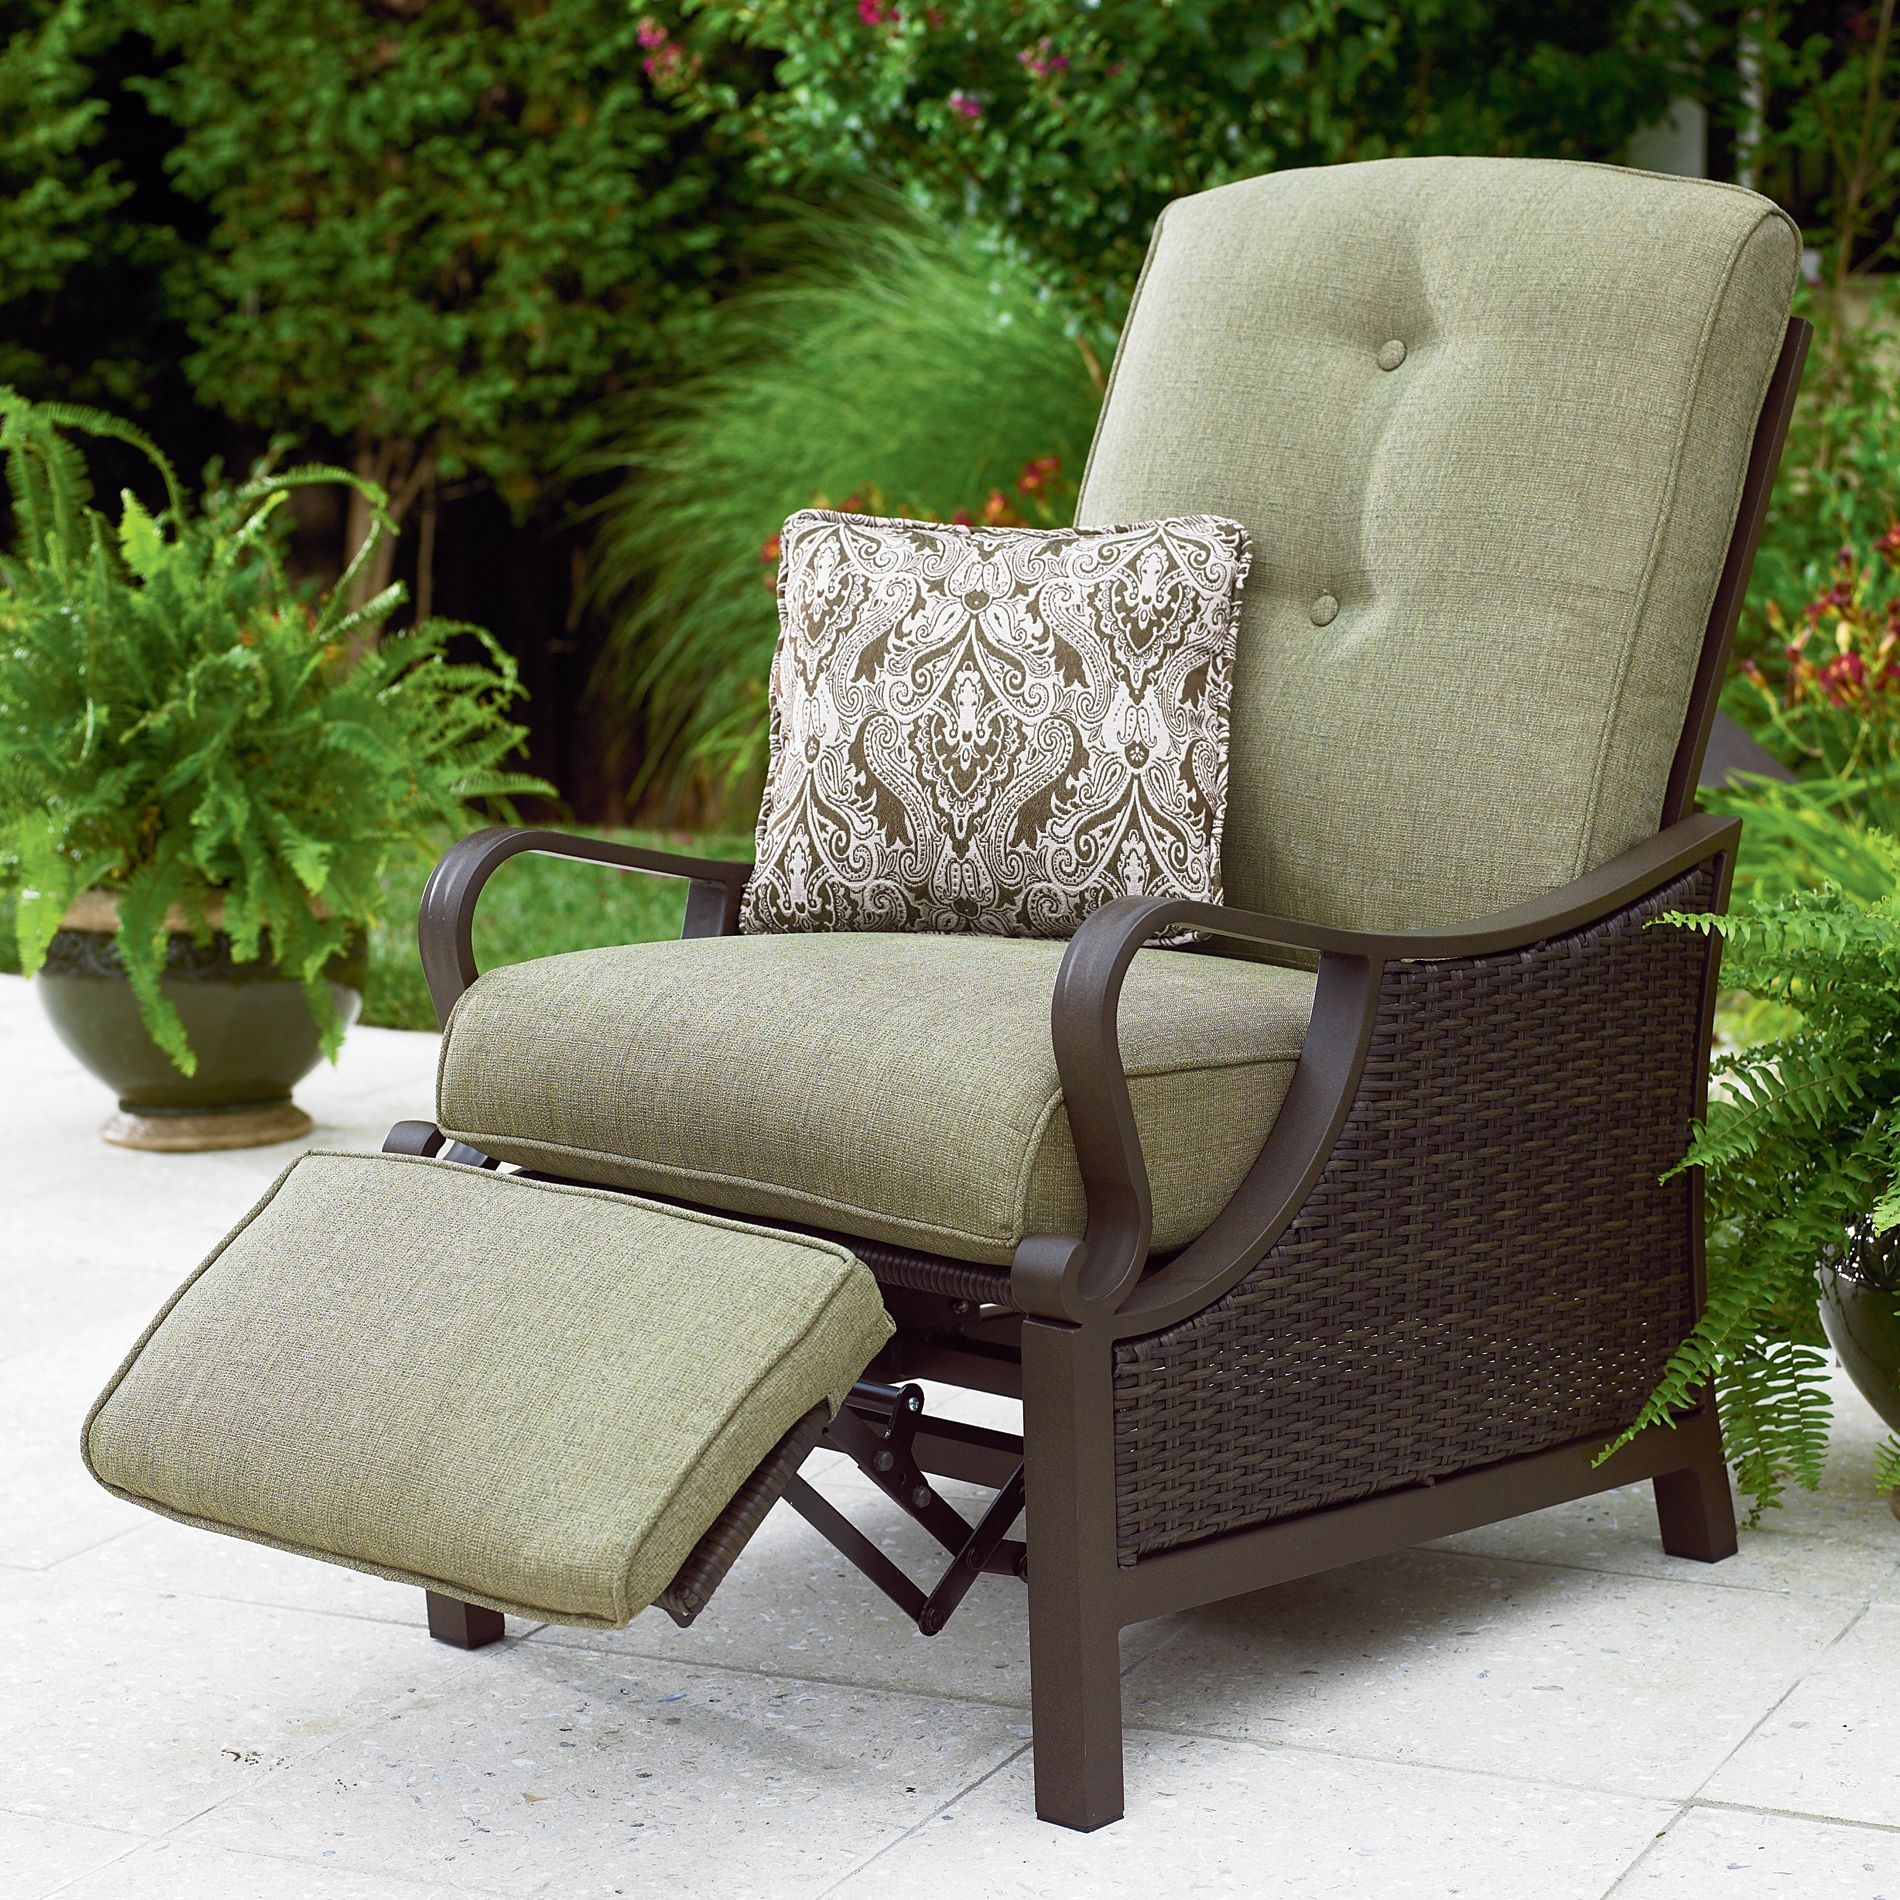 Hanover Outdoor Ventura Luxury Recliner Chair With Cushions